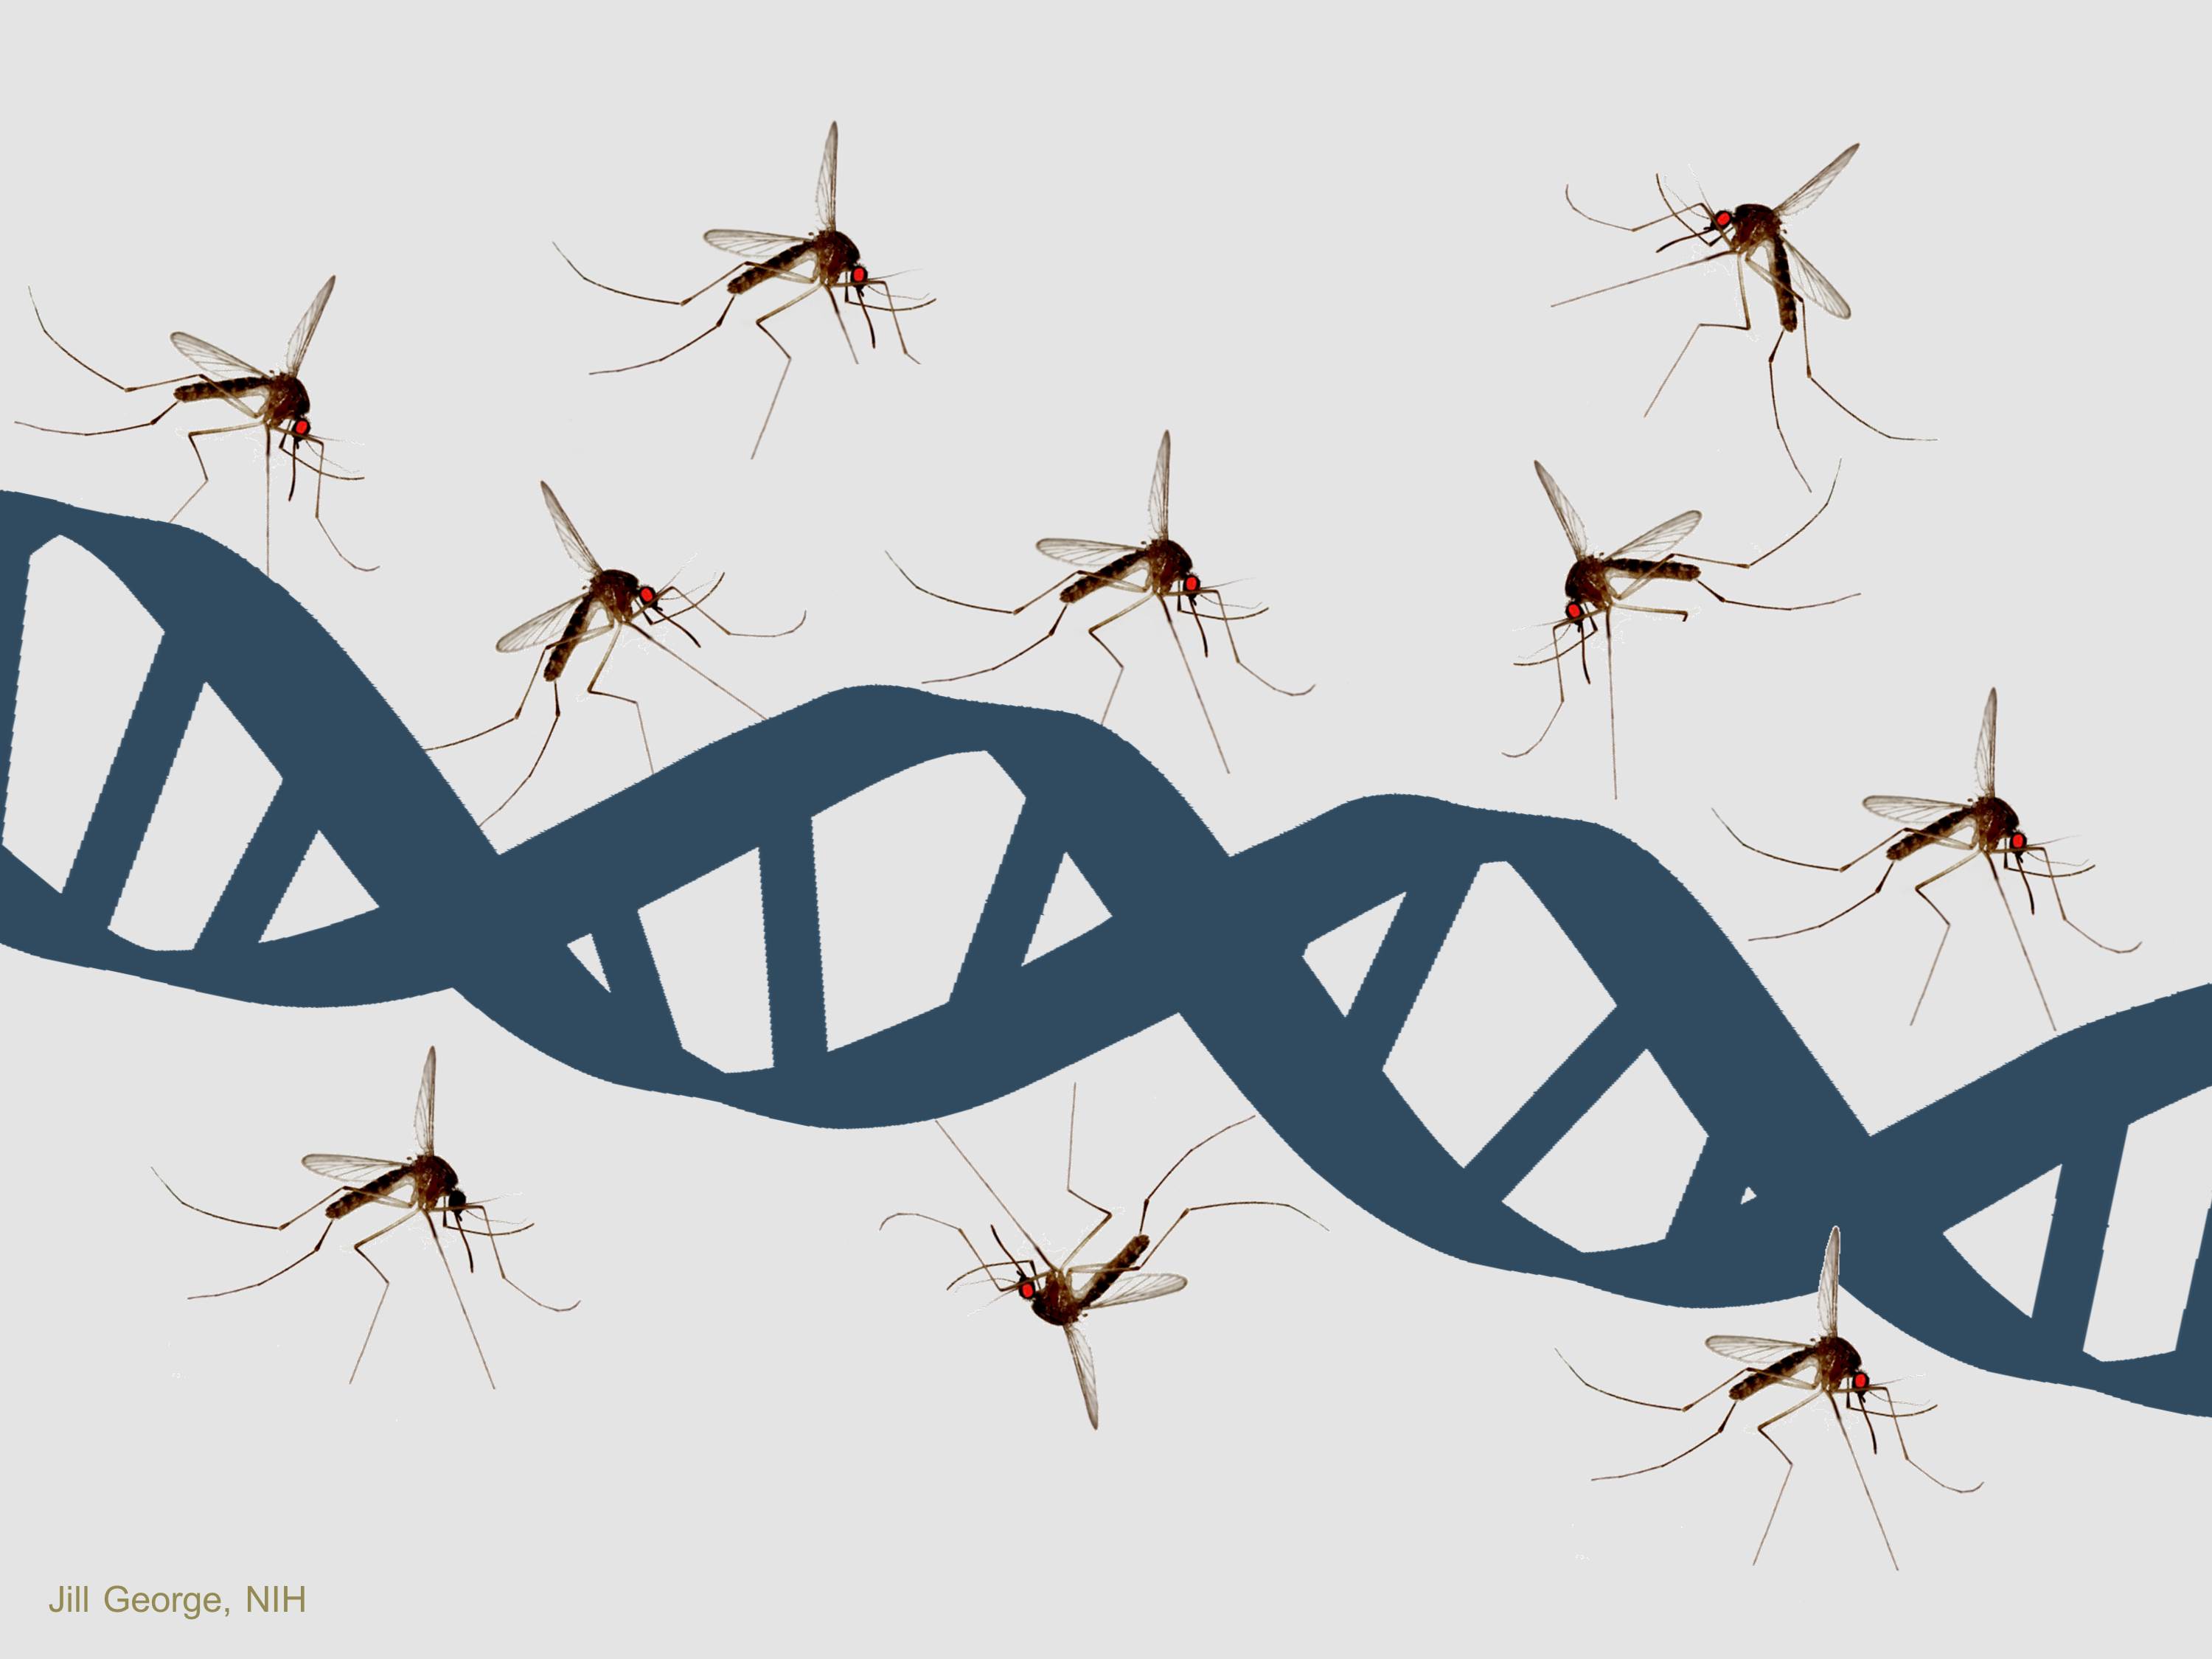 Scientists at UC Berkeley and UC Riverside have demonstrated a way to edit the genome of disease-carrying mosquitoes that brings us closer to suppressing them on a continental scale. [NIH]